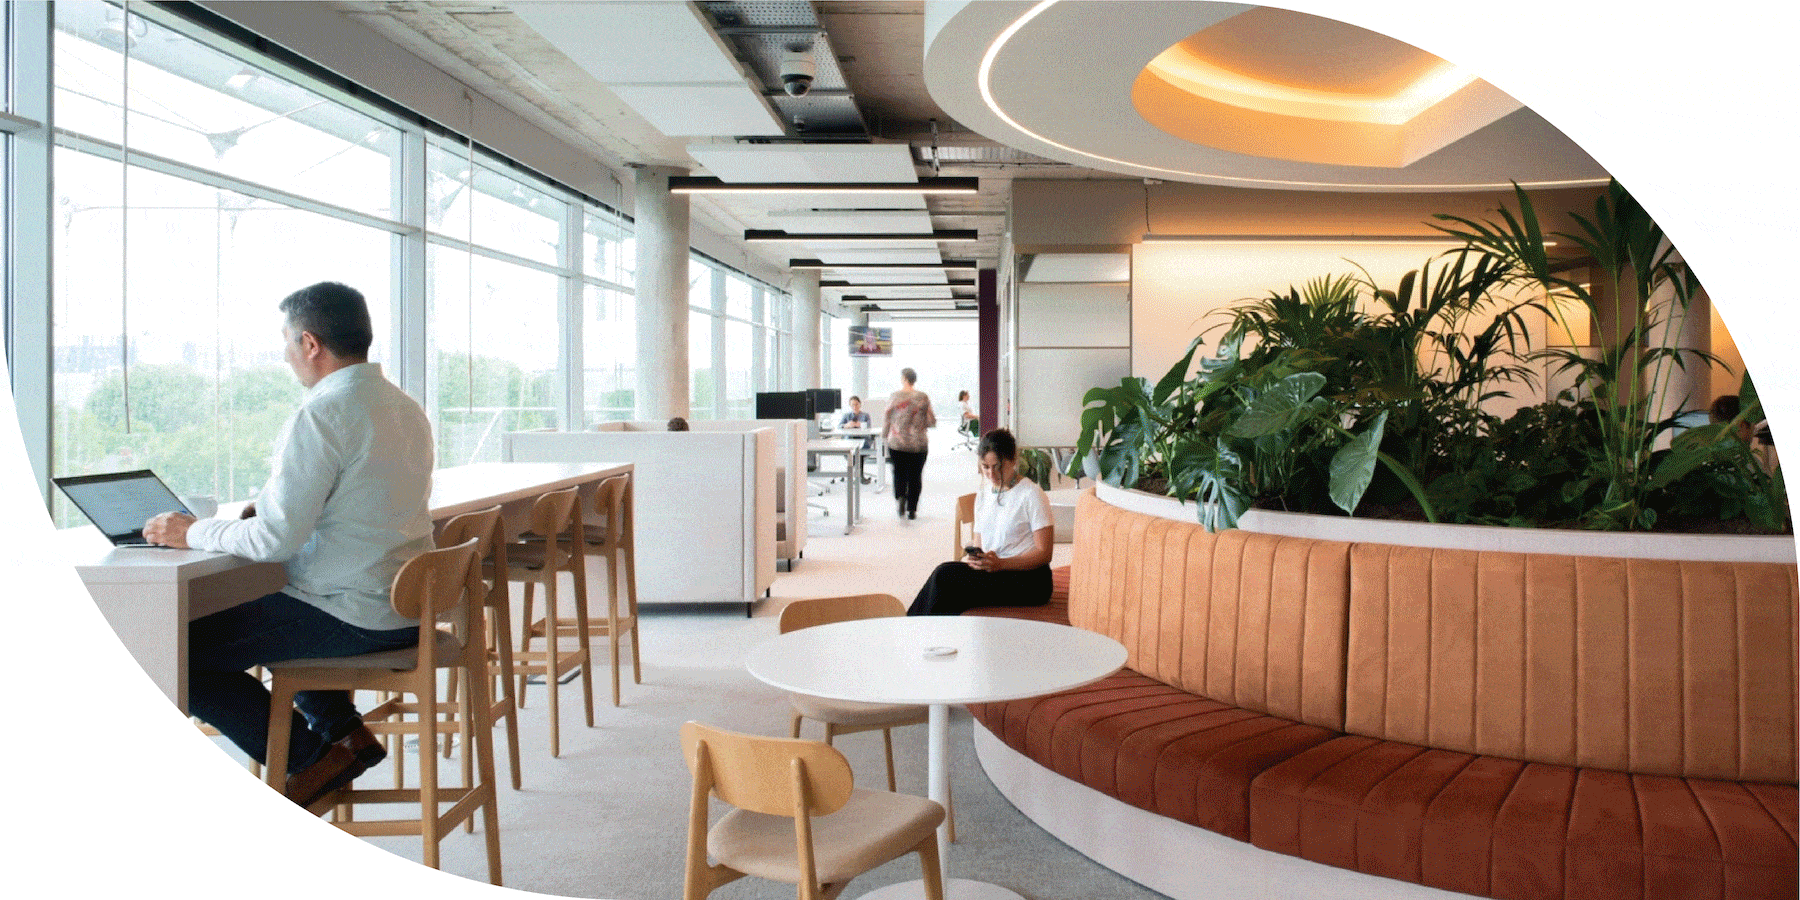 Modern offices with natural material in lobbies and private work spaces